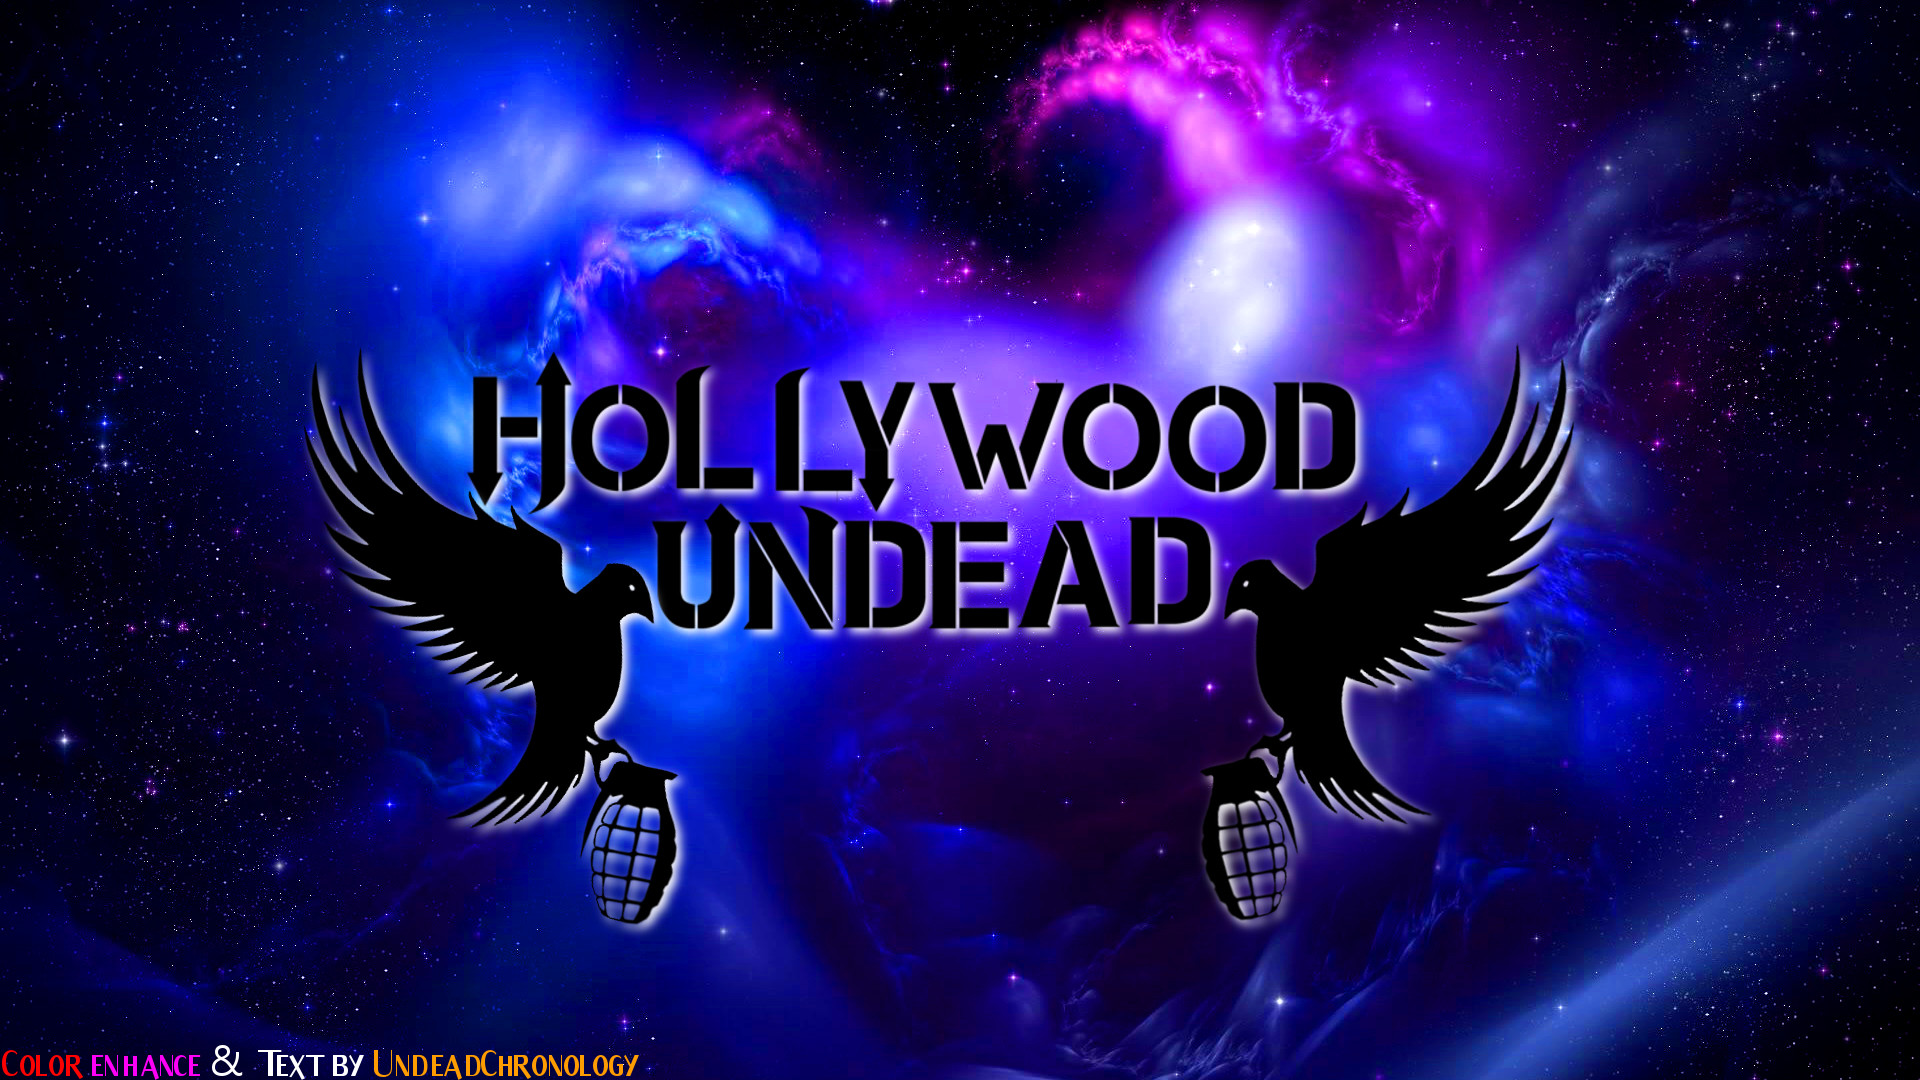 1920x1080 Hollywood Undead Wallpaper 1080p by DcfEmpx on DeviantArt